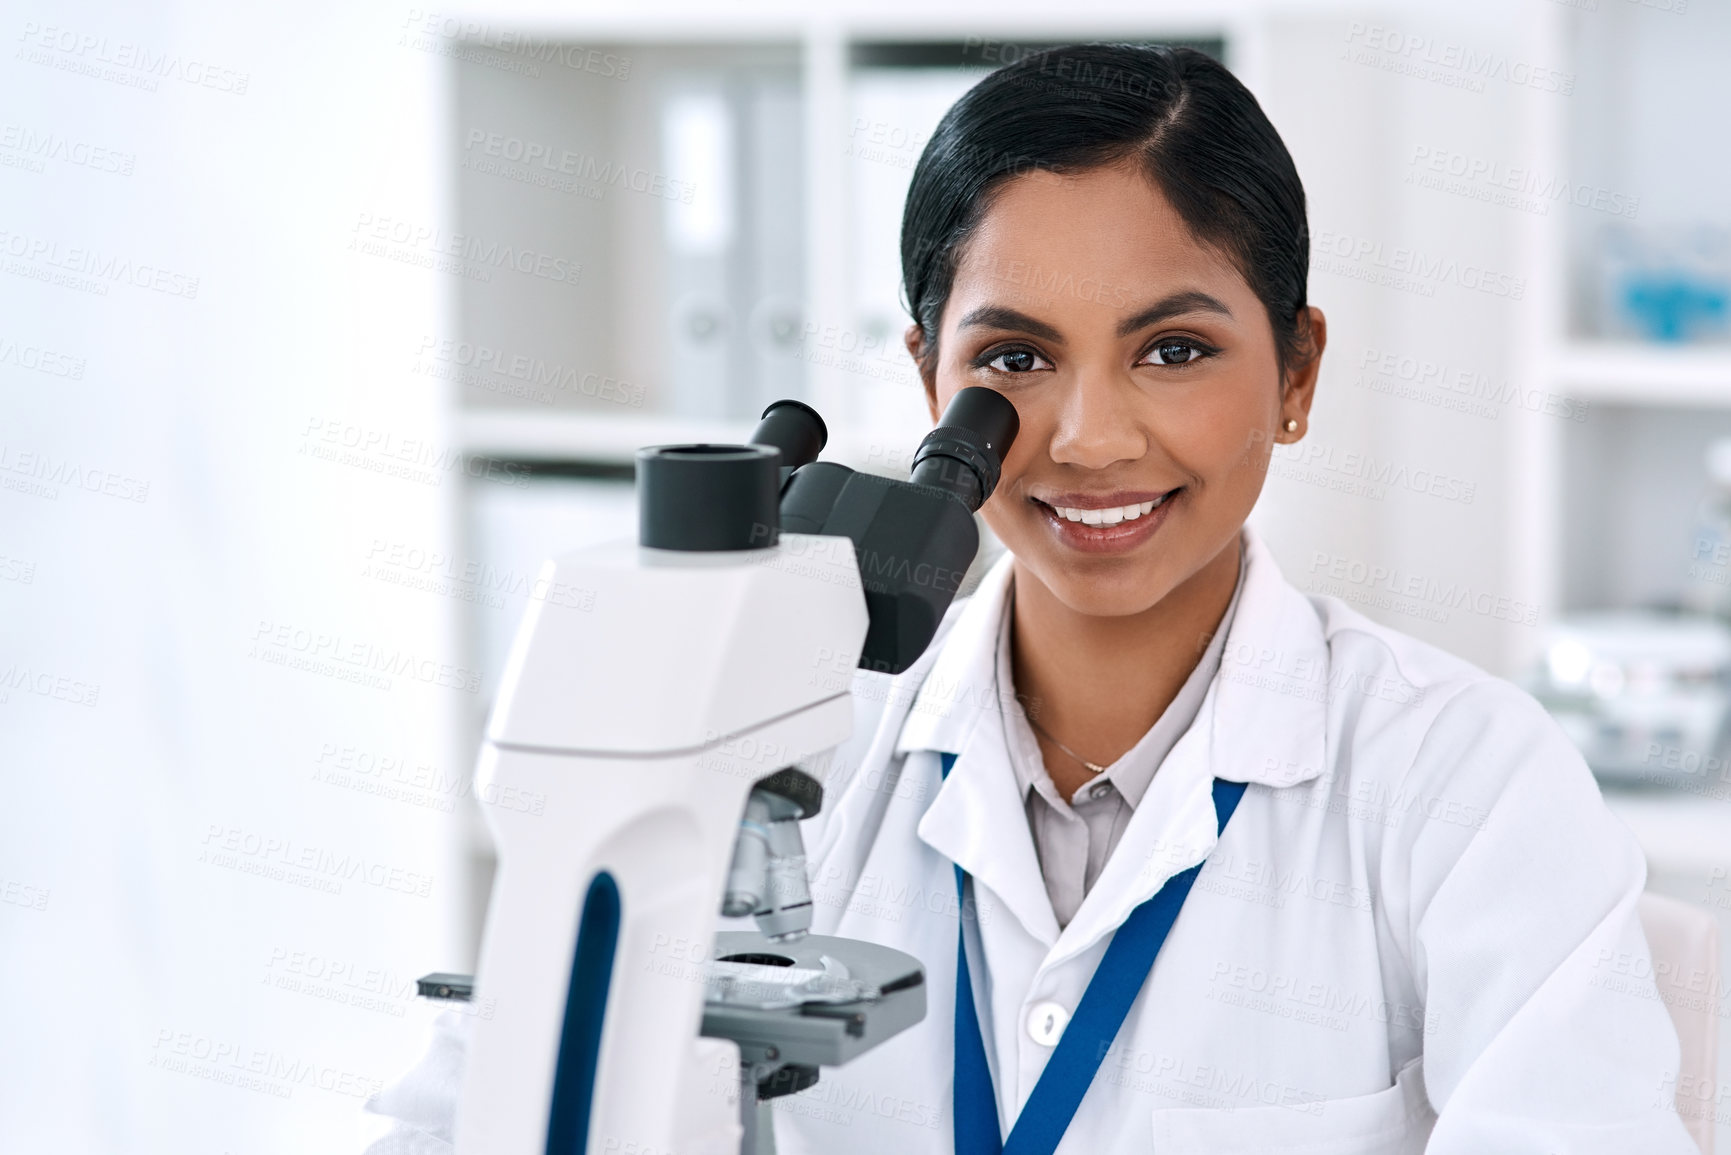 Buy stock photo Cropped portrait of an attractive young female scientist smiling while working with a microscope in a laboratory